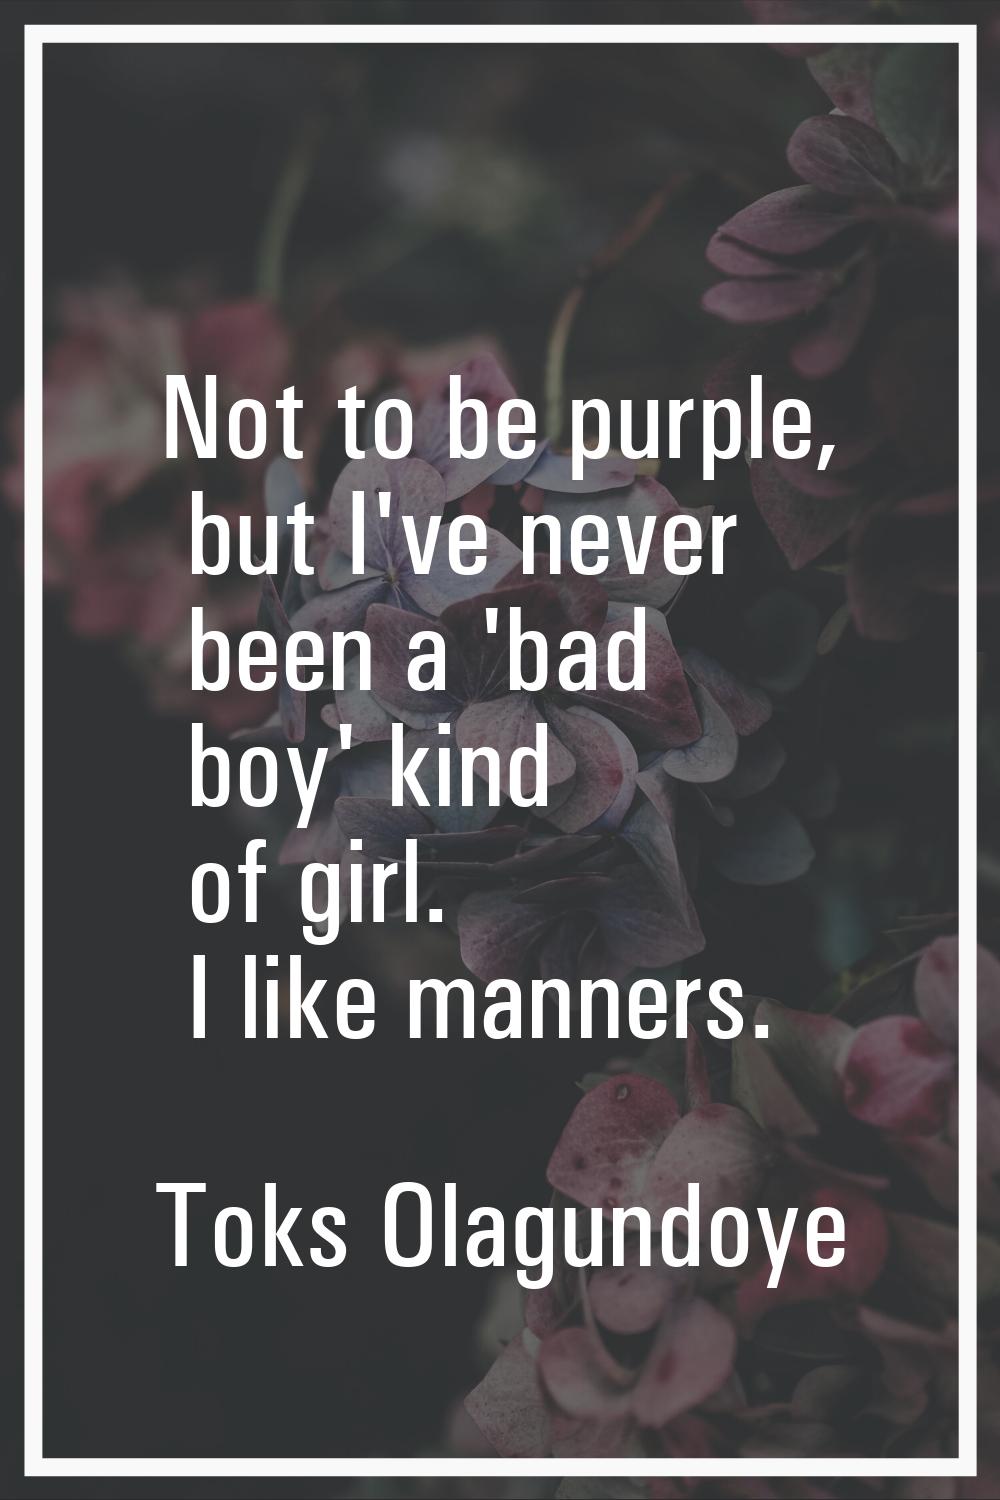 Not to be purple, but I've never been a 'bad boy' kind of girl. I like manners.